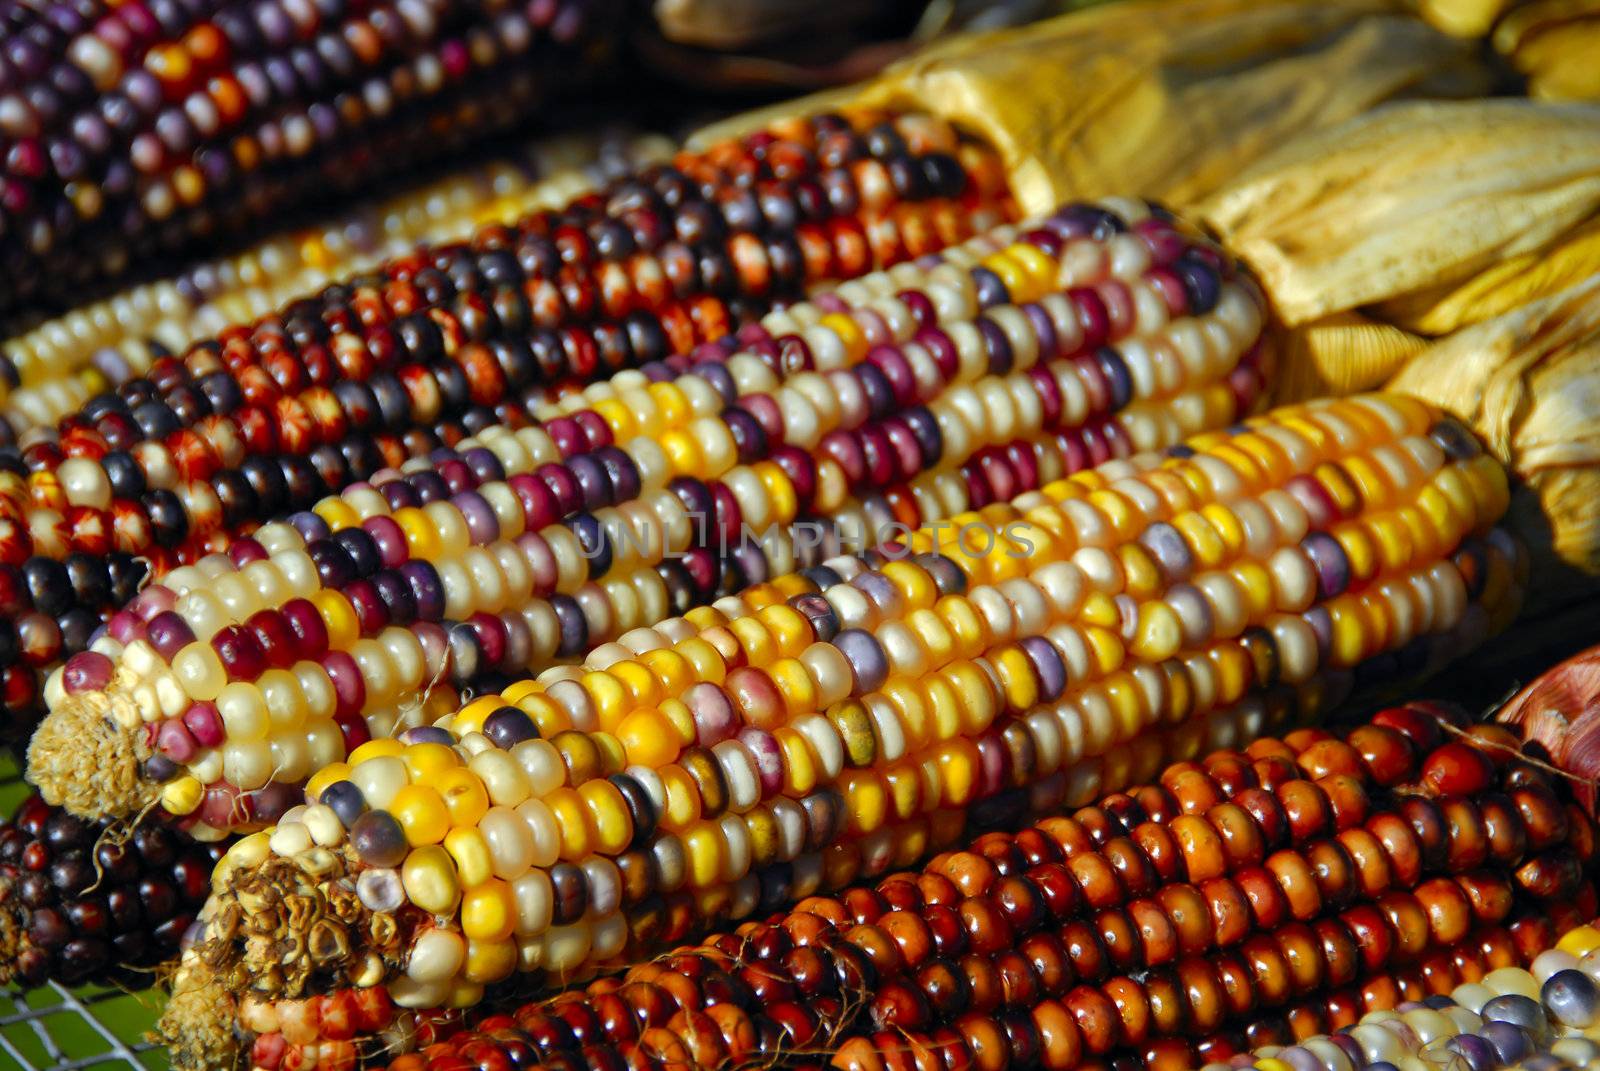 Freshly harvested Indian corn arranged for sale at a local market